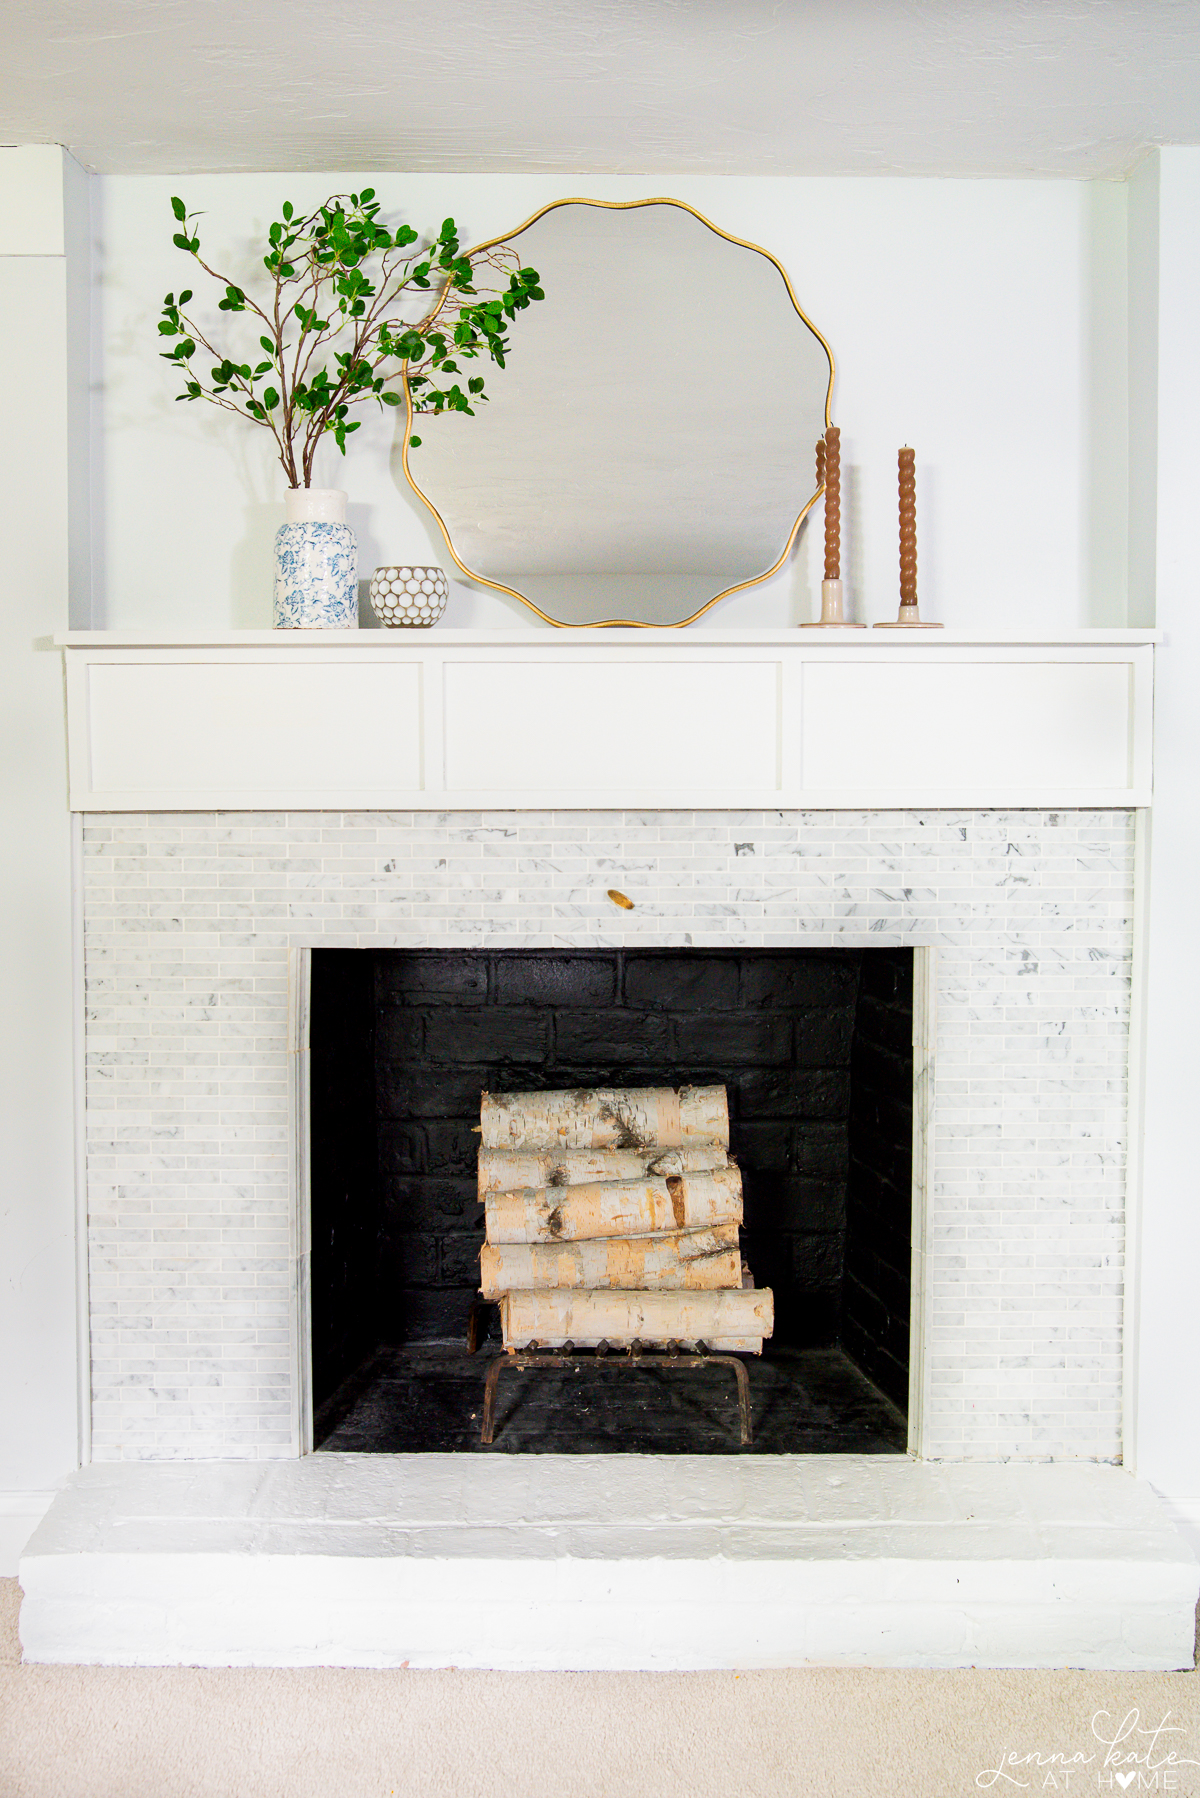 scalloped brass mirror over a fireplace mantel